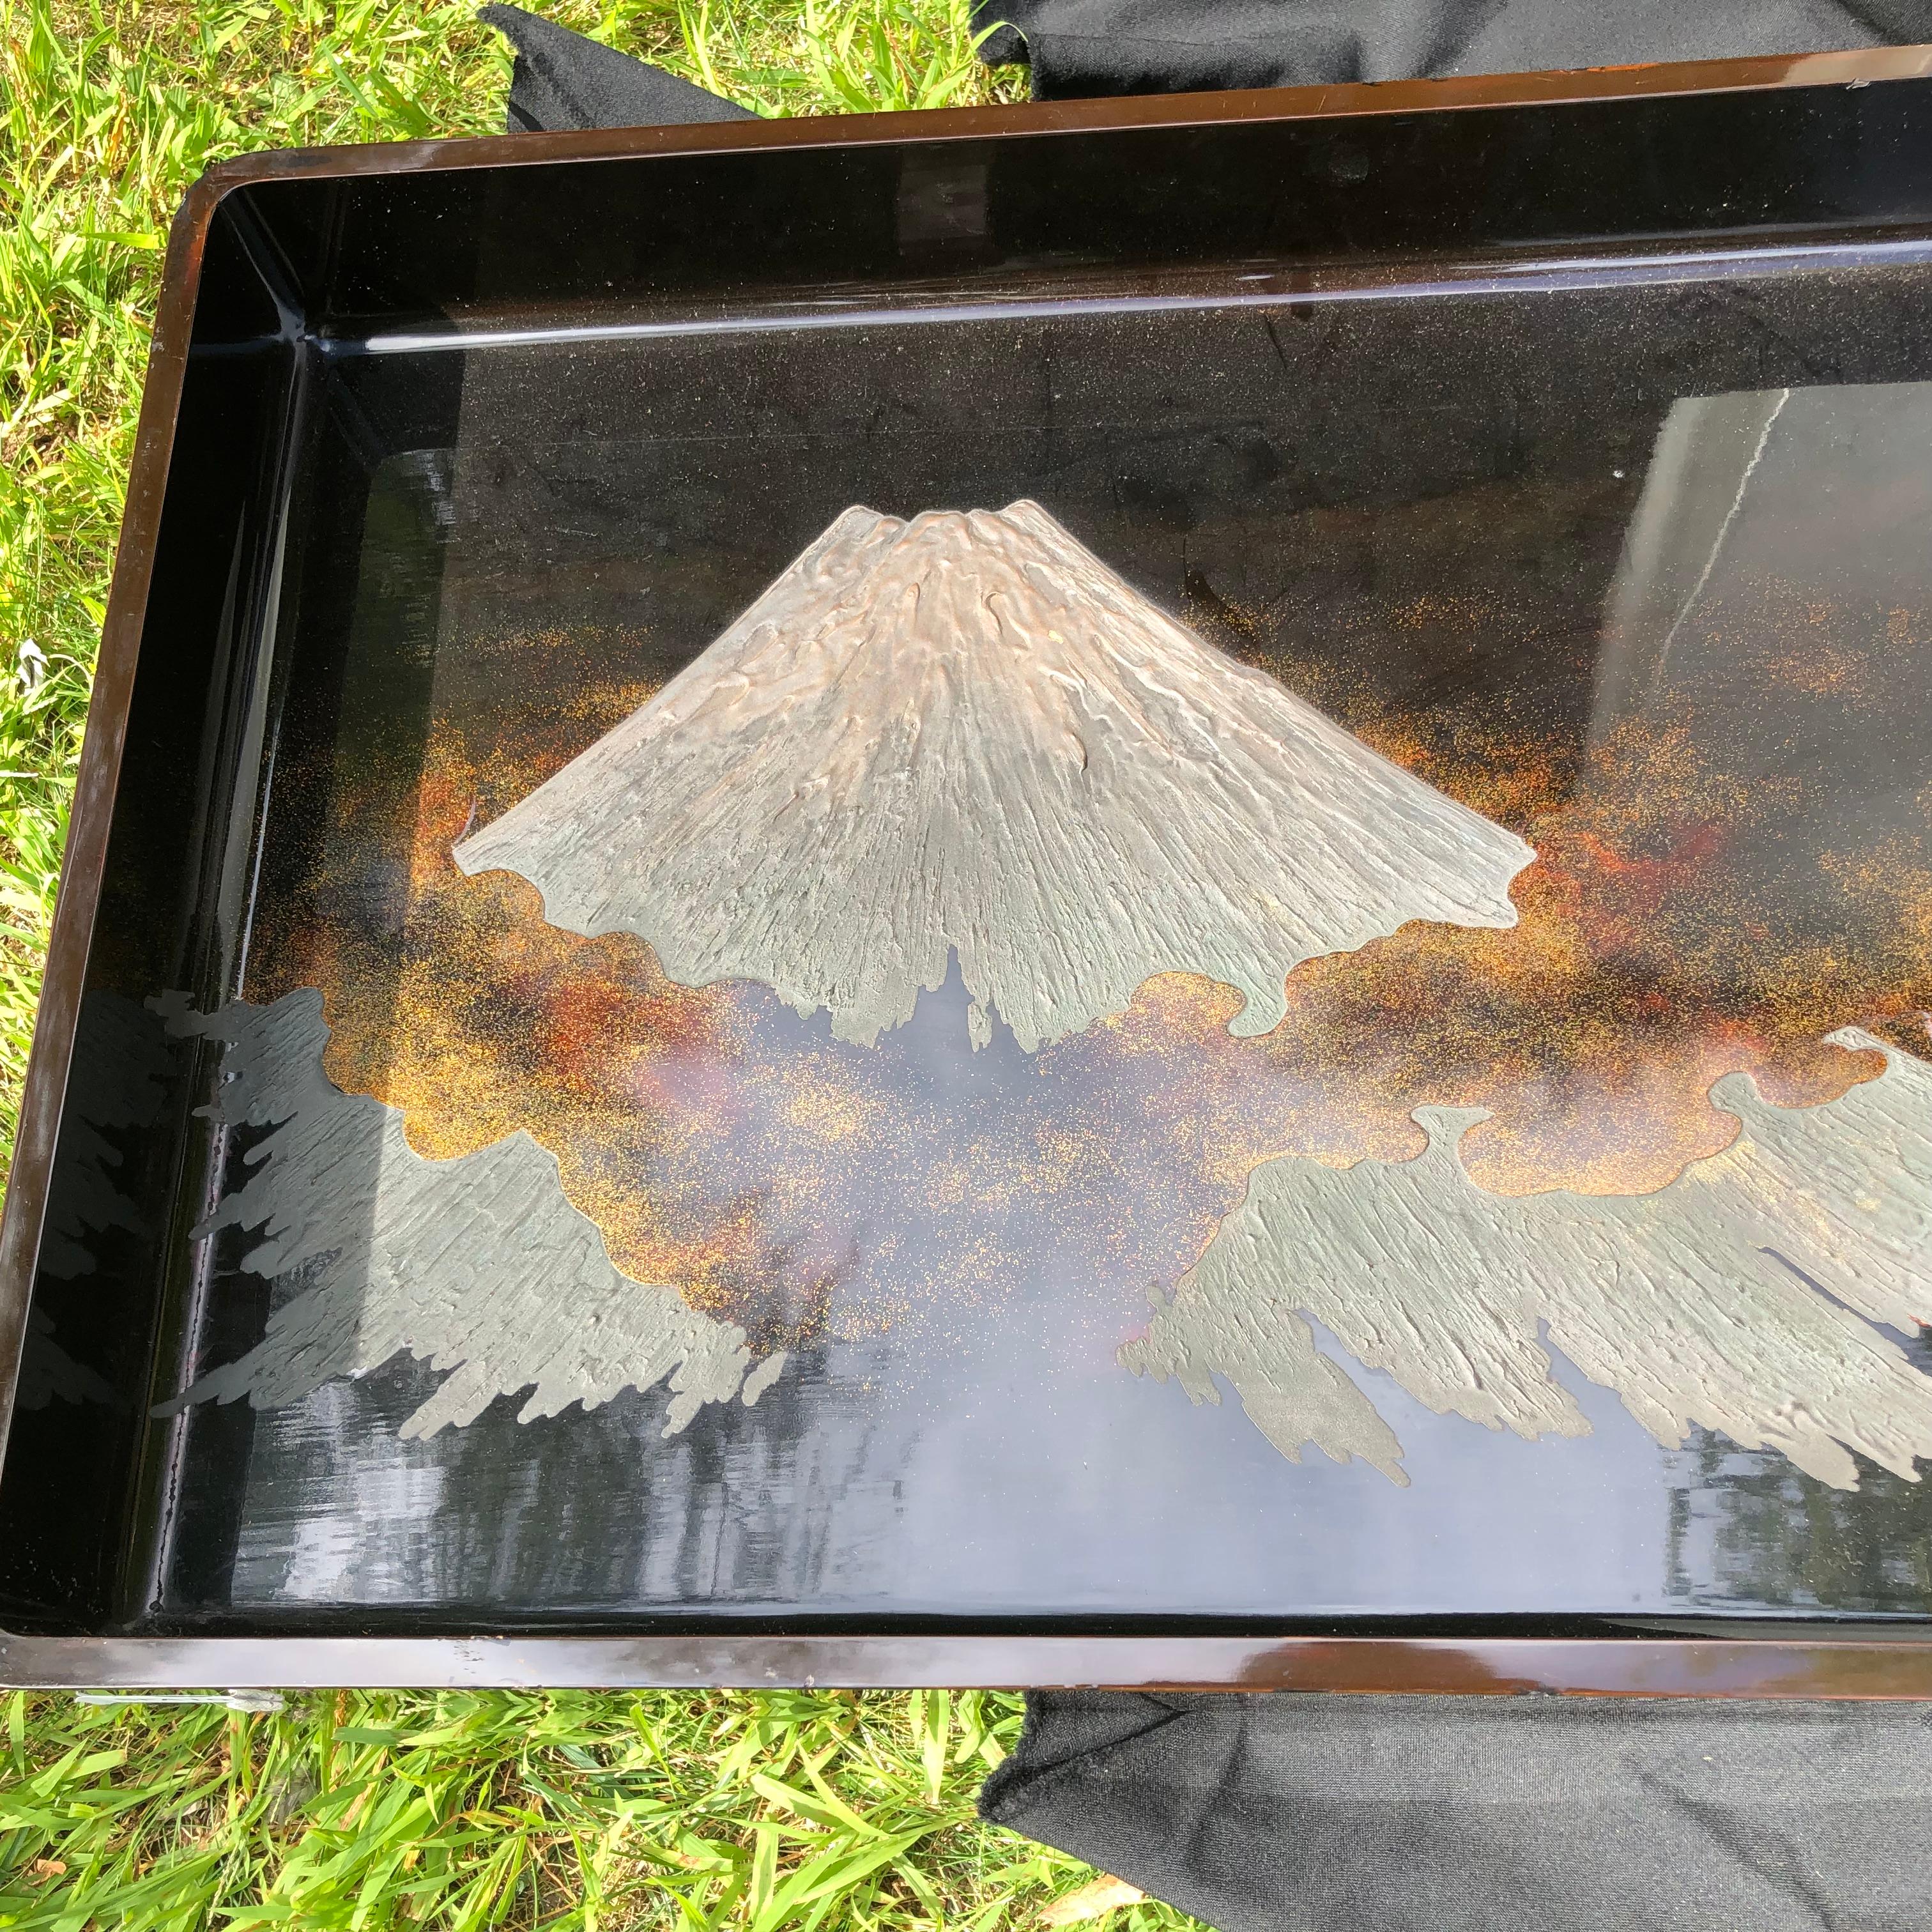 From our recent Japanese acquisition travels

Mount Fuji has never before been depicted so beautifully.

This is superb Japanese handmade and hand lacquered serving tray or wall art piece crafted in rich and famous 30 layer lacquers from Wakasa